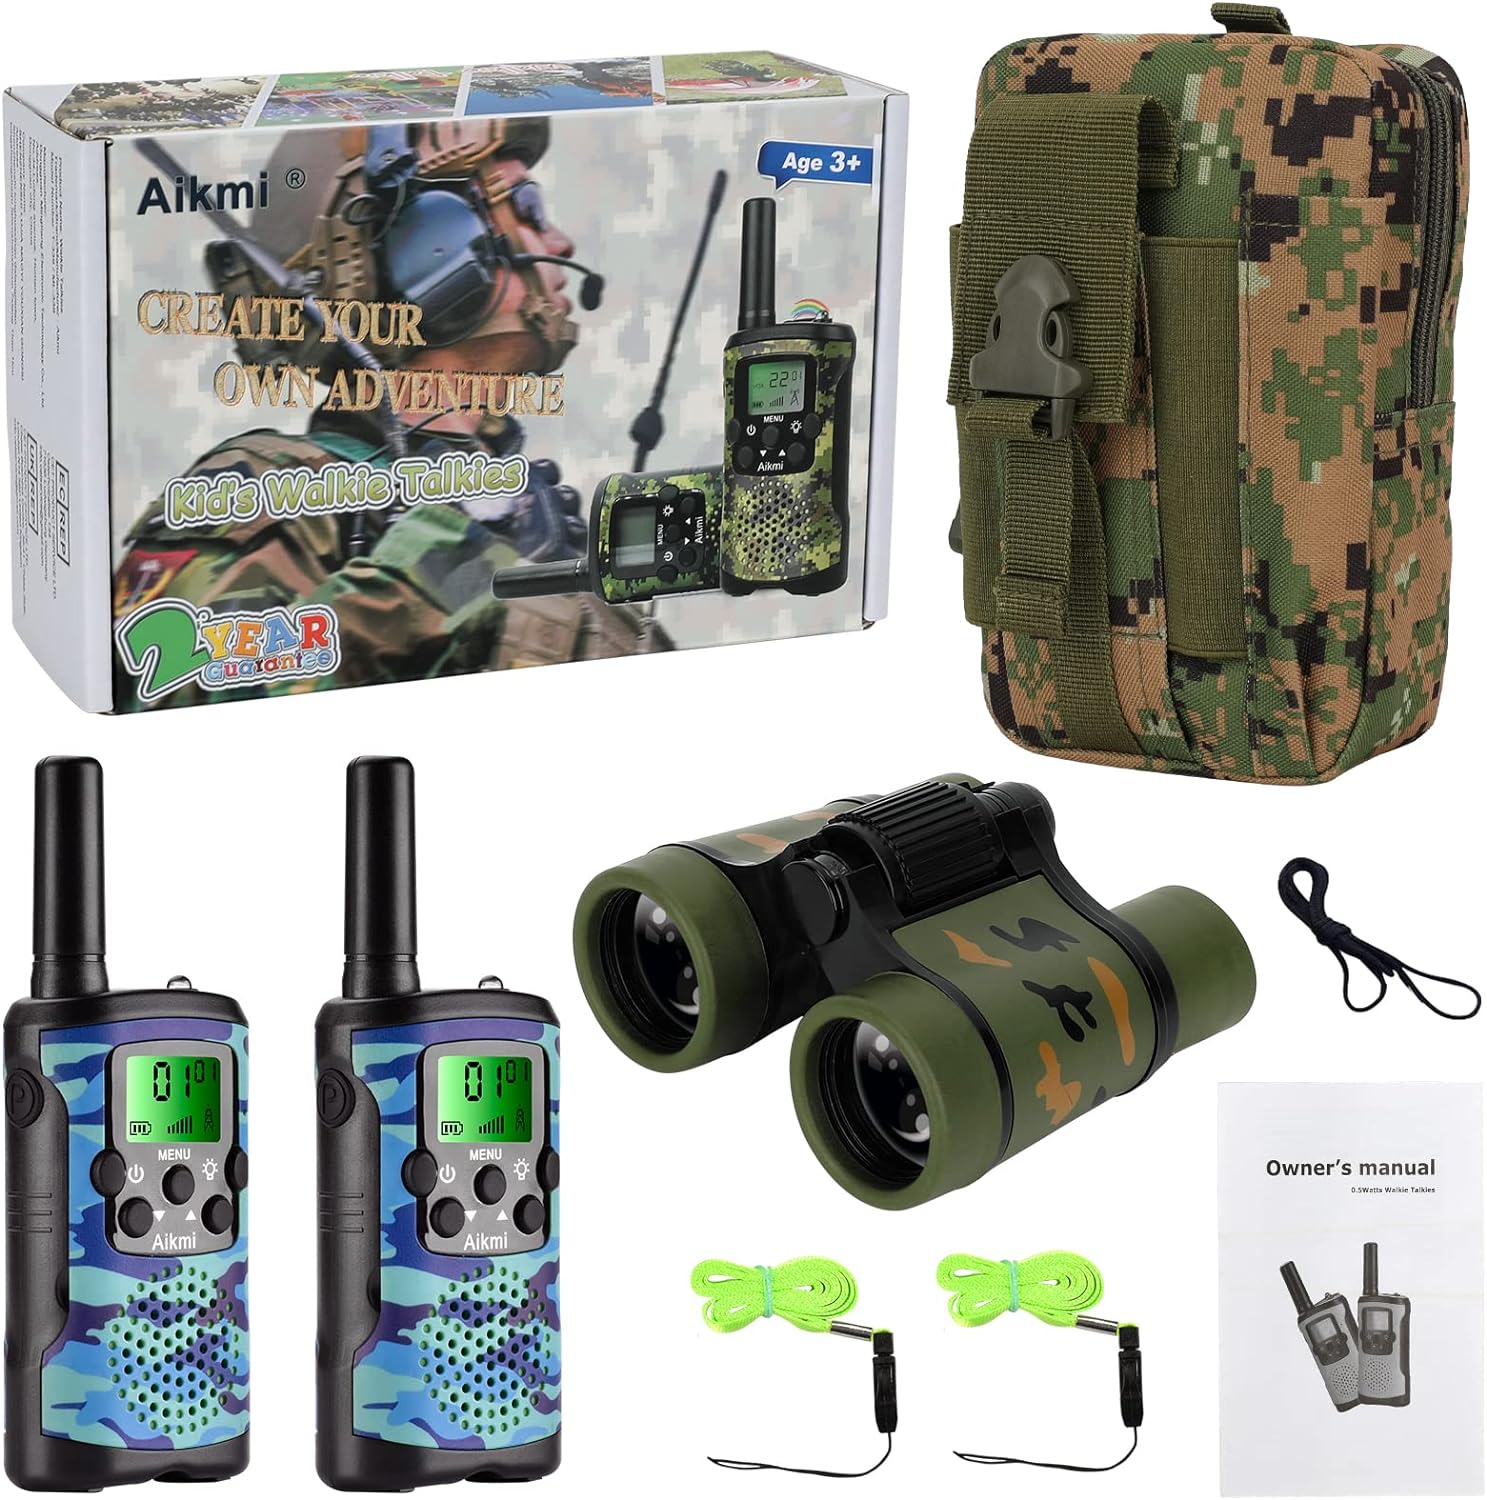 You are currently viewing Walkie Talkies for Kids Toys Boys Aged 5+ Outdoor 2 Way Radio 22 Channel 3 Miles Range Camp Hunt Adventure Game Birthday 6 7 8 9 10 Year Old Gifts (Green) Review